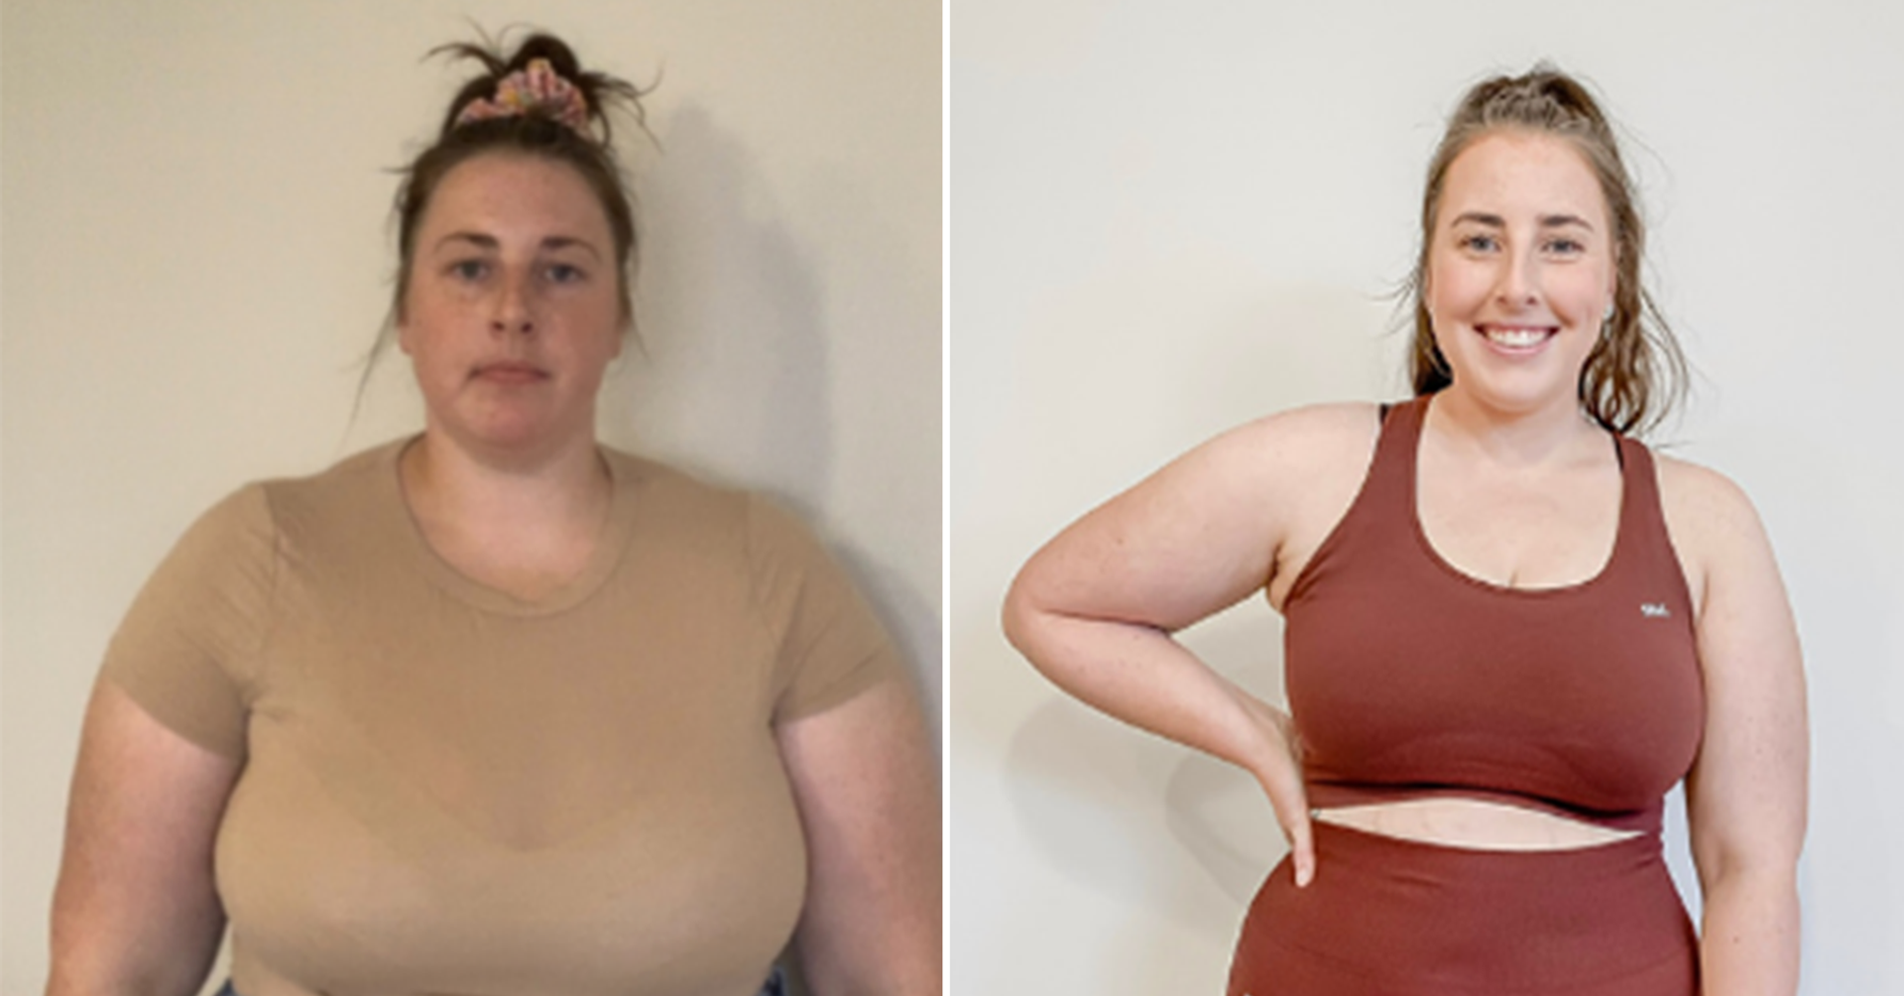 EXCLUSIVE: How this mum addicted to chocolate lost 30 kilos after trying “every diet under the sun”